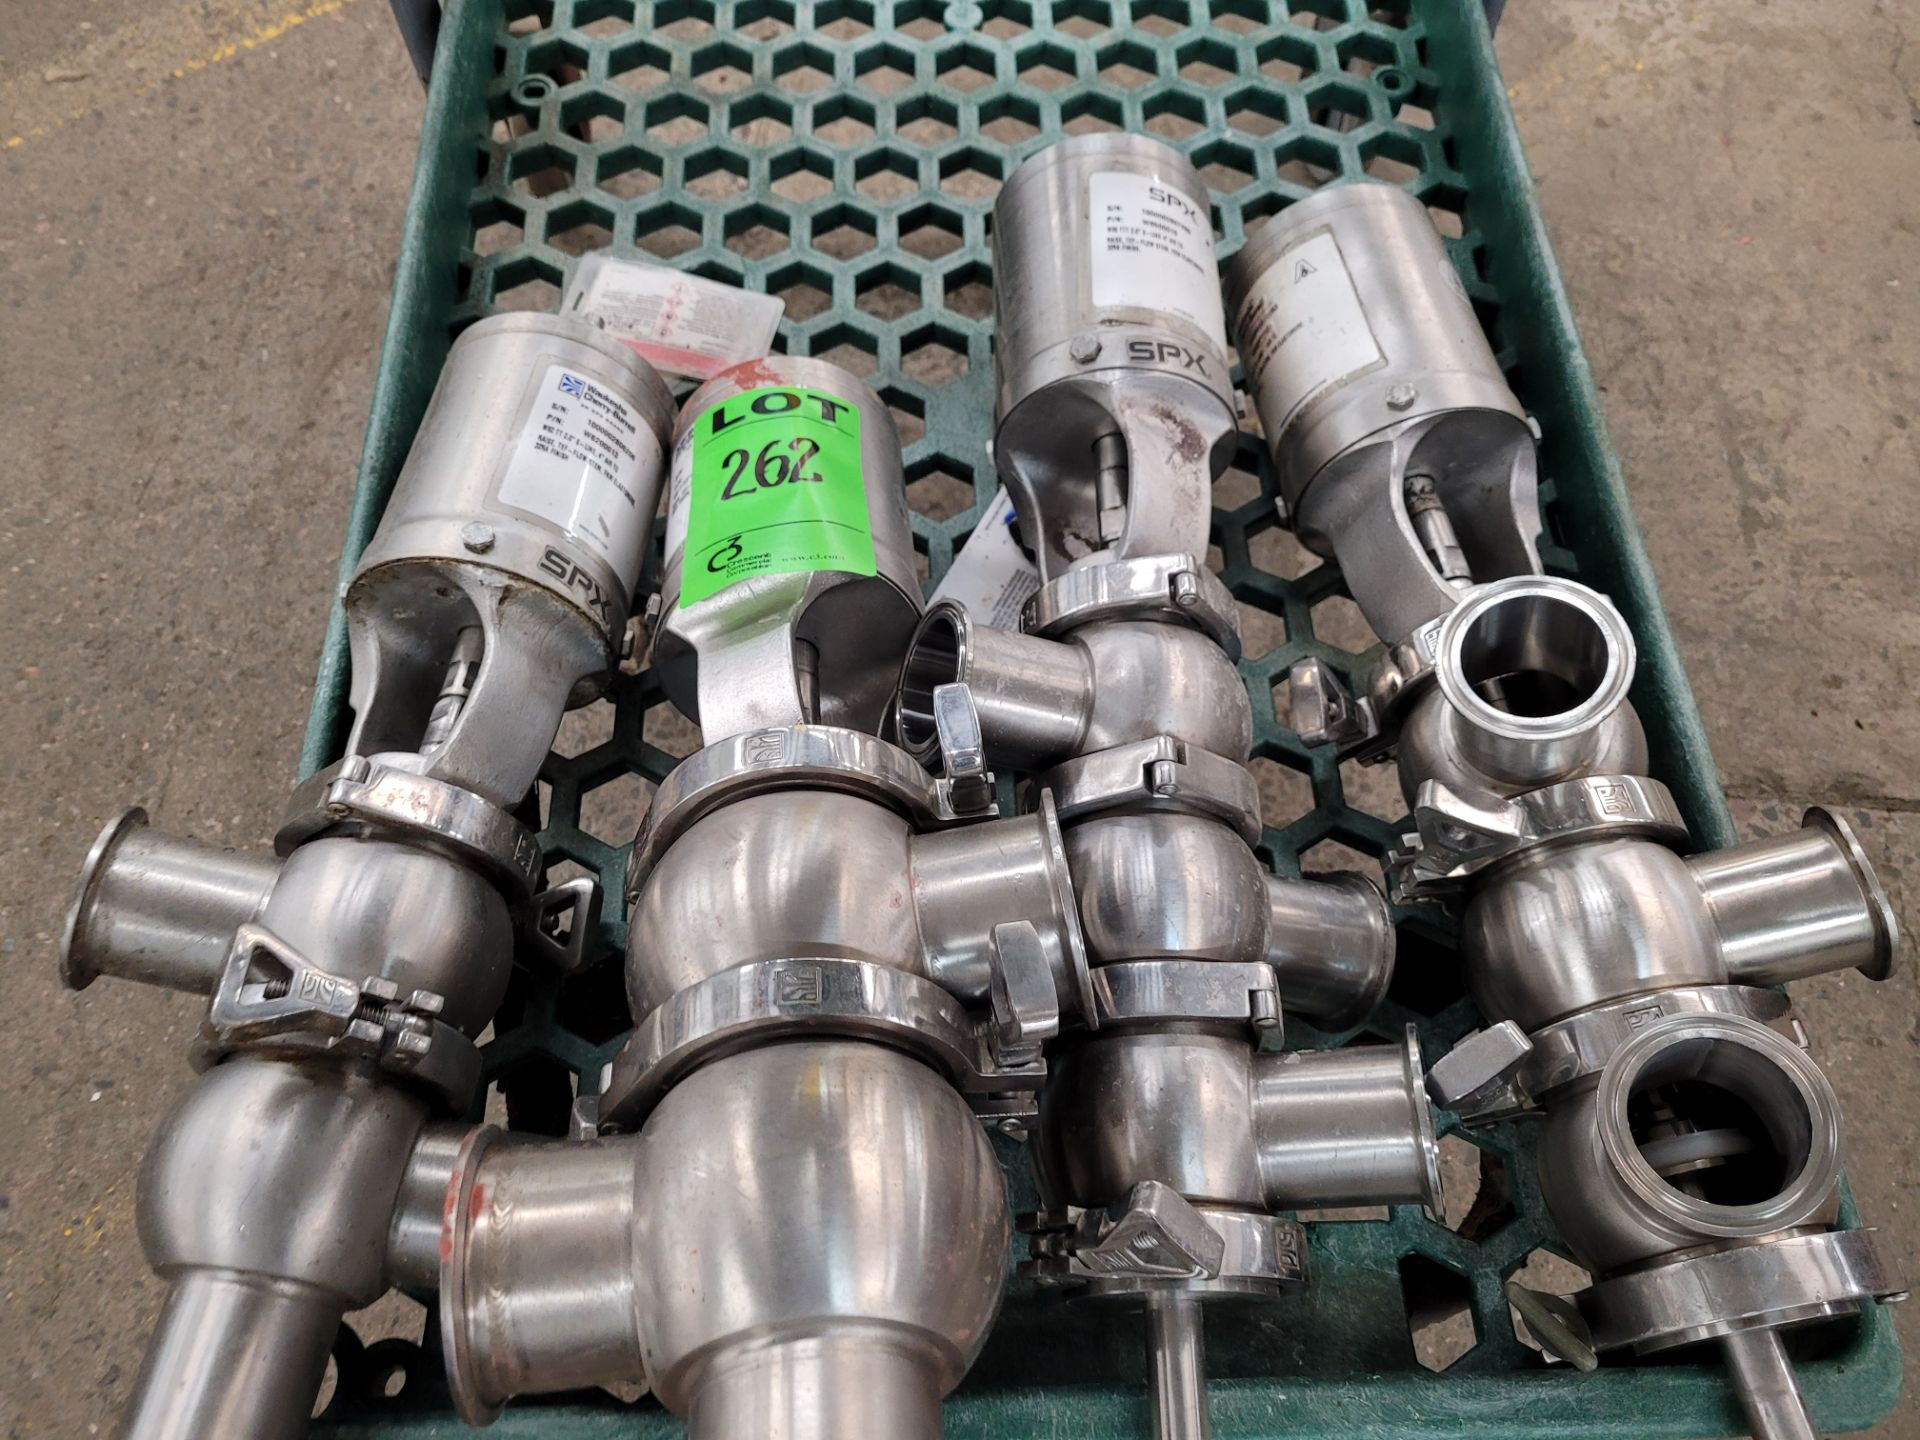 Lot of (4) stainless 3-way actuator valves consisting of (2) 2" valves, (1) 2 1/2" valves, (1) SPX v